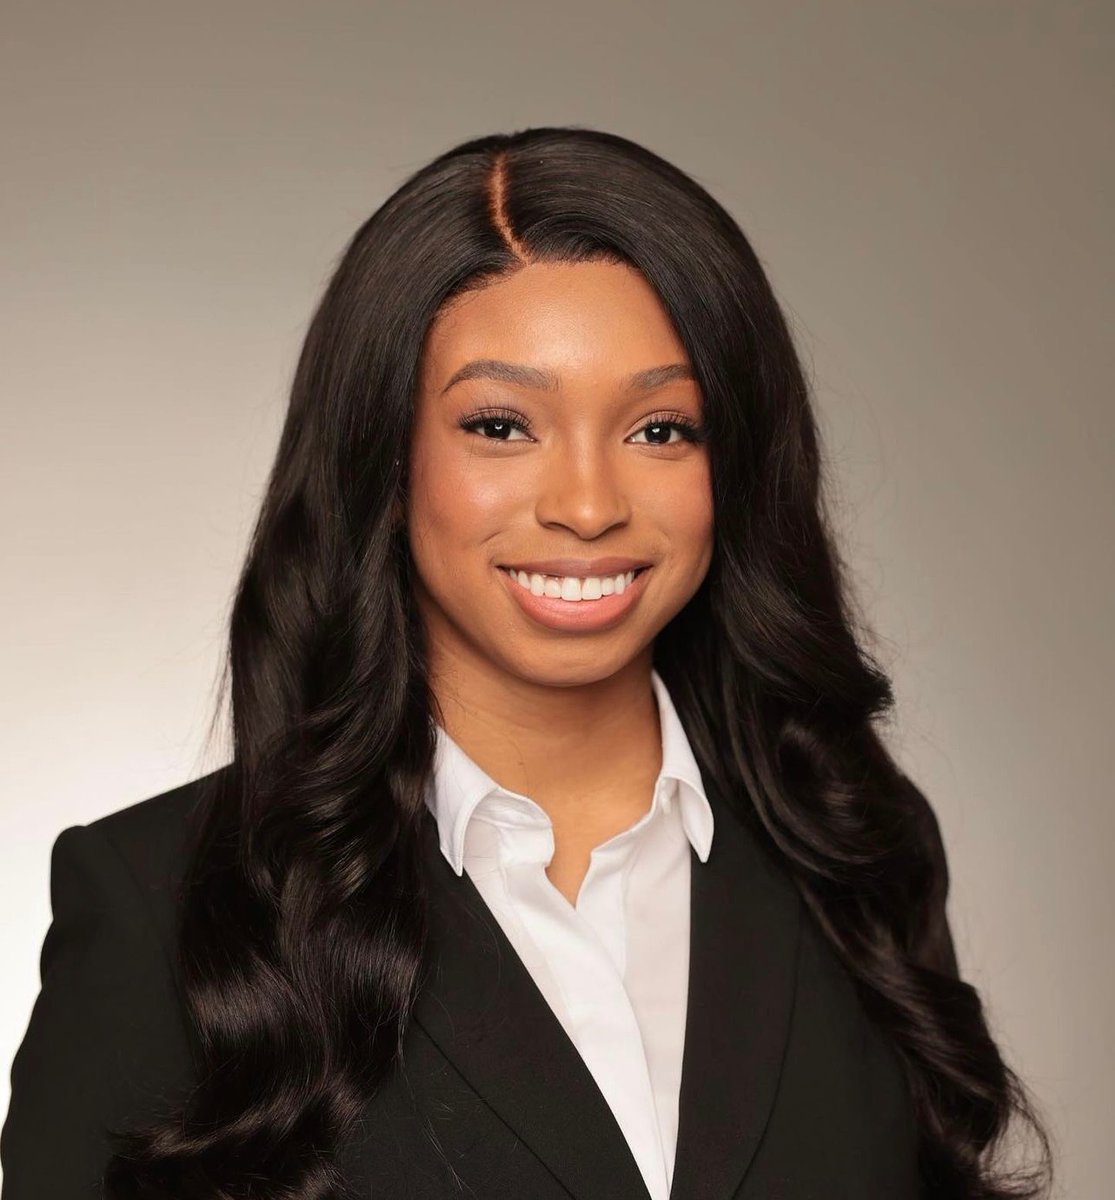 In honor of Women’s History Month, @NFLATennessee would like to congratulate Dr. Tamia Potter on becoming the First Black Female Neurosurgery Resident at Vanderbilt in its 149-year history. @pottertamia @VUMC_Neurosurg #WomensHistoryMonth2023